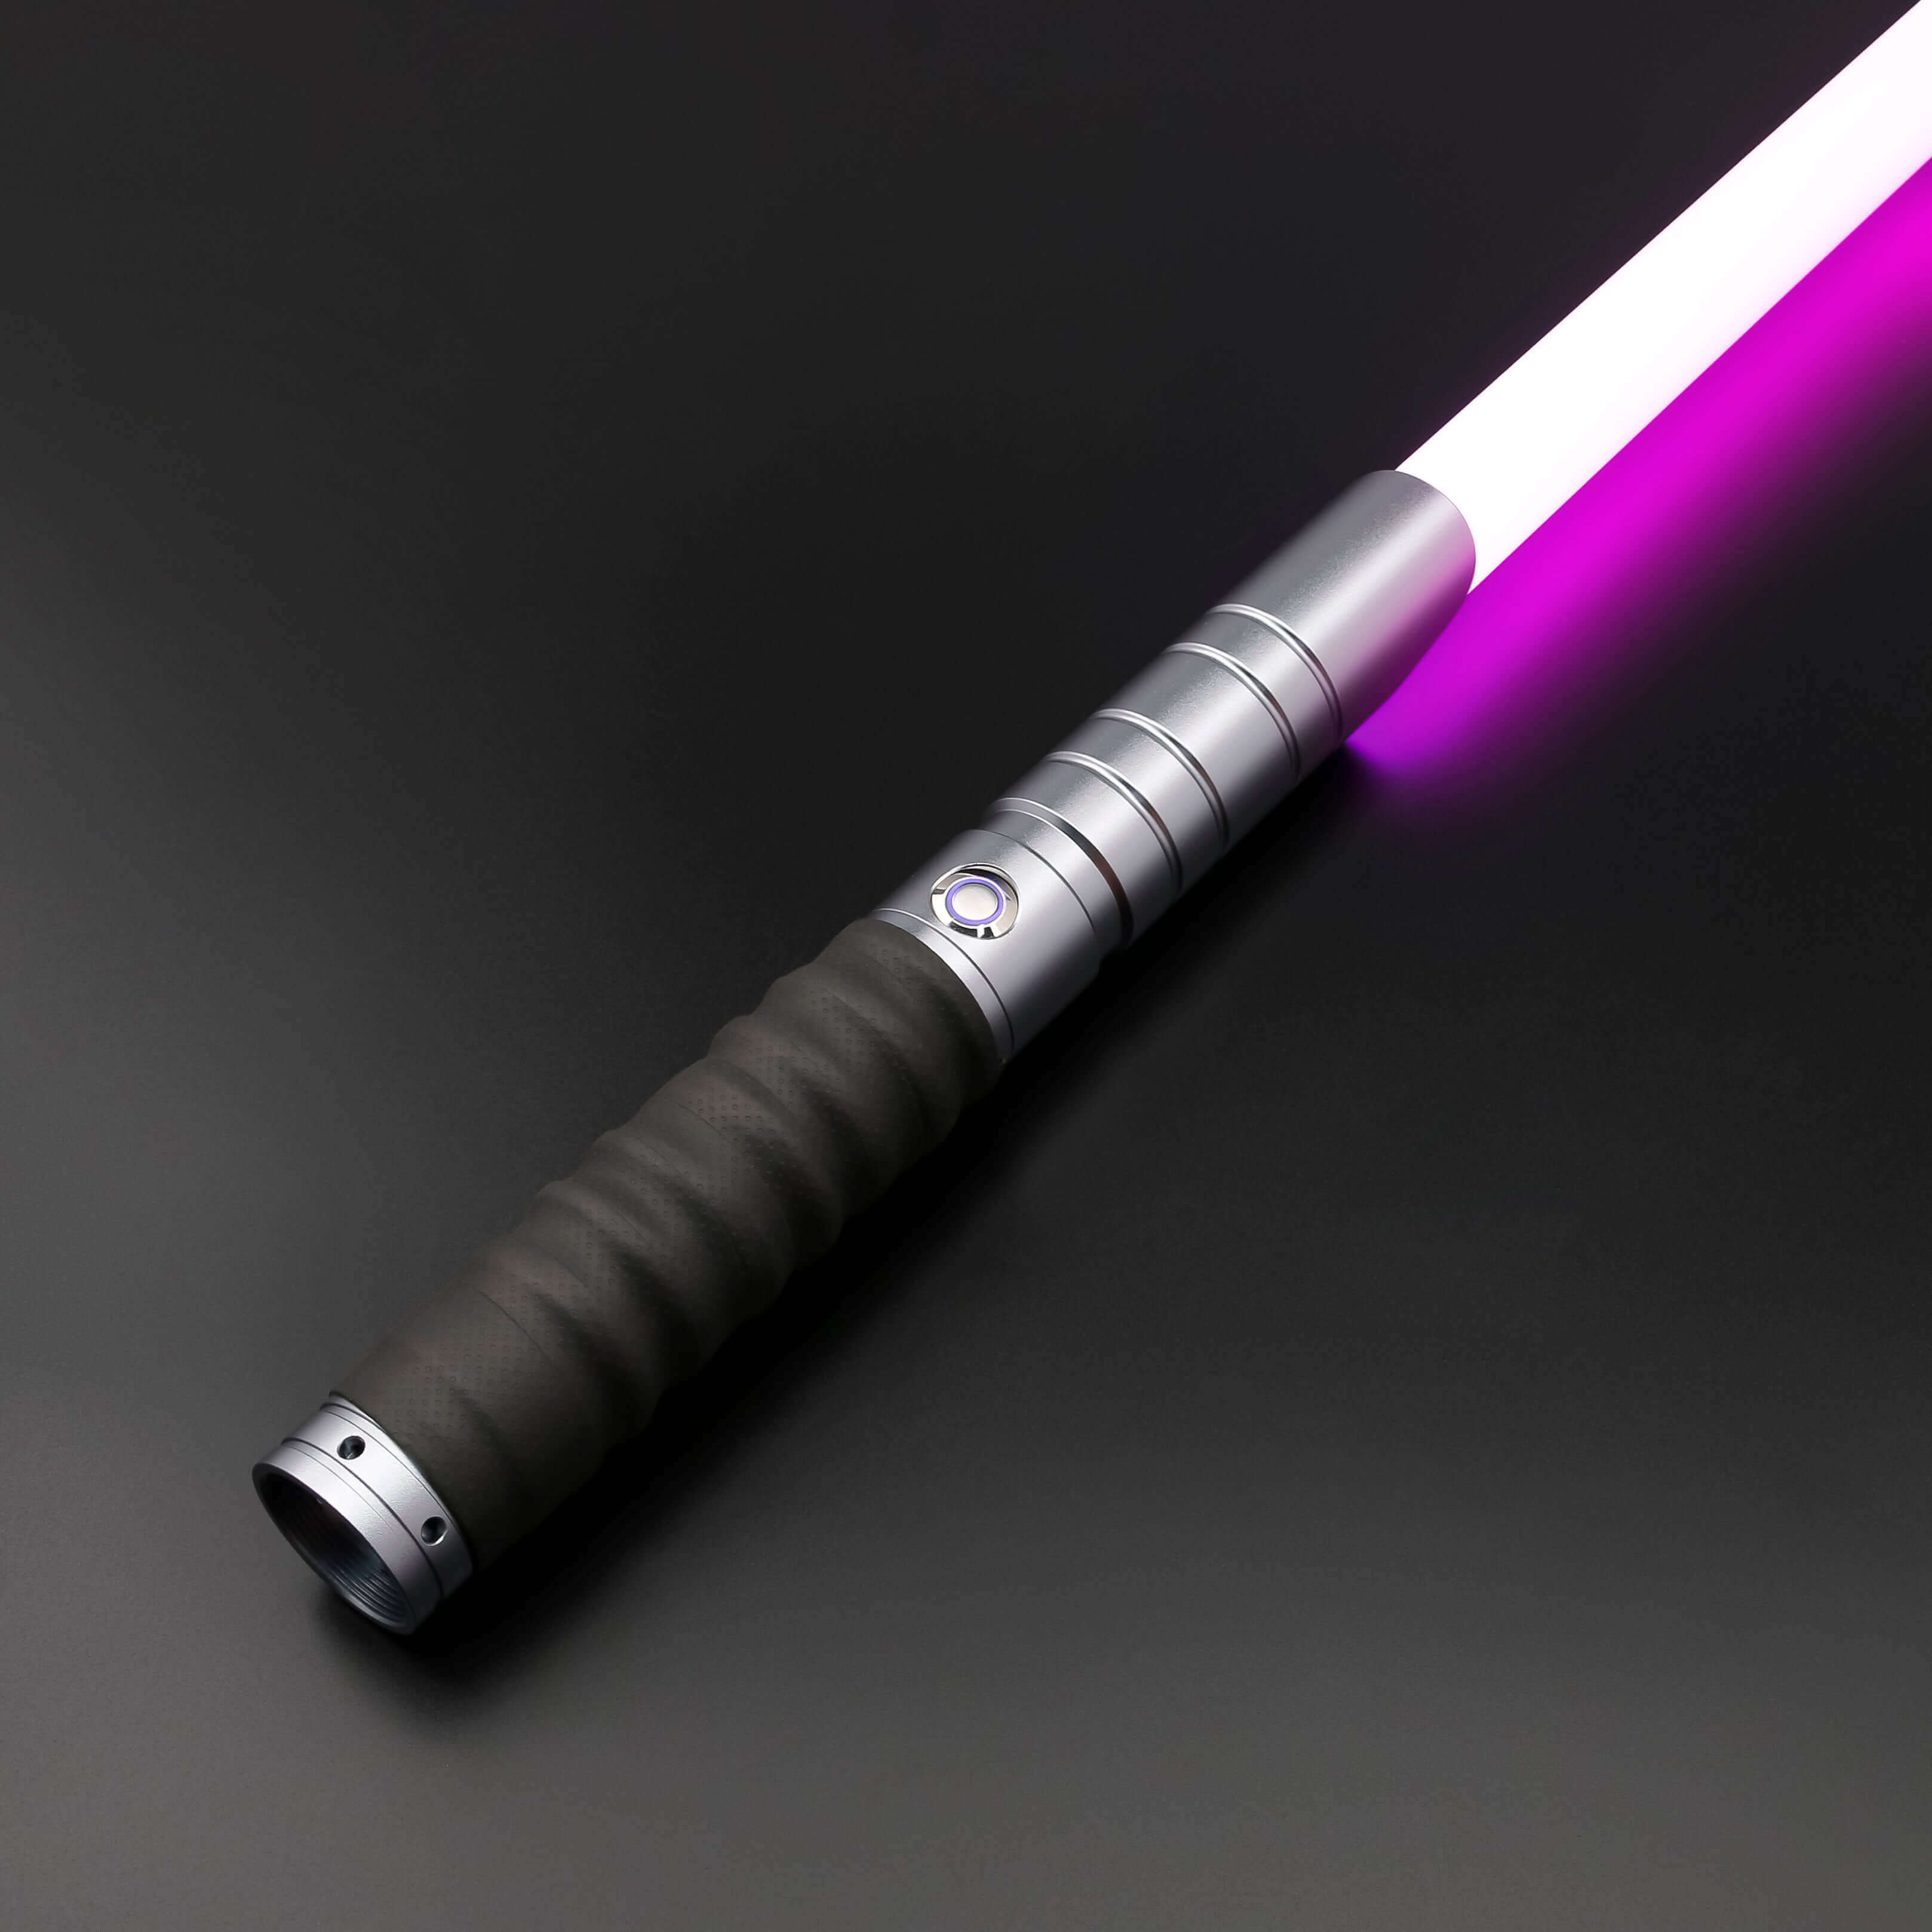 Combat Lightsabers: Battle-Ready and Built for Duels